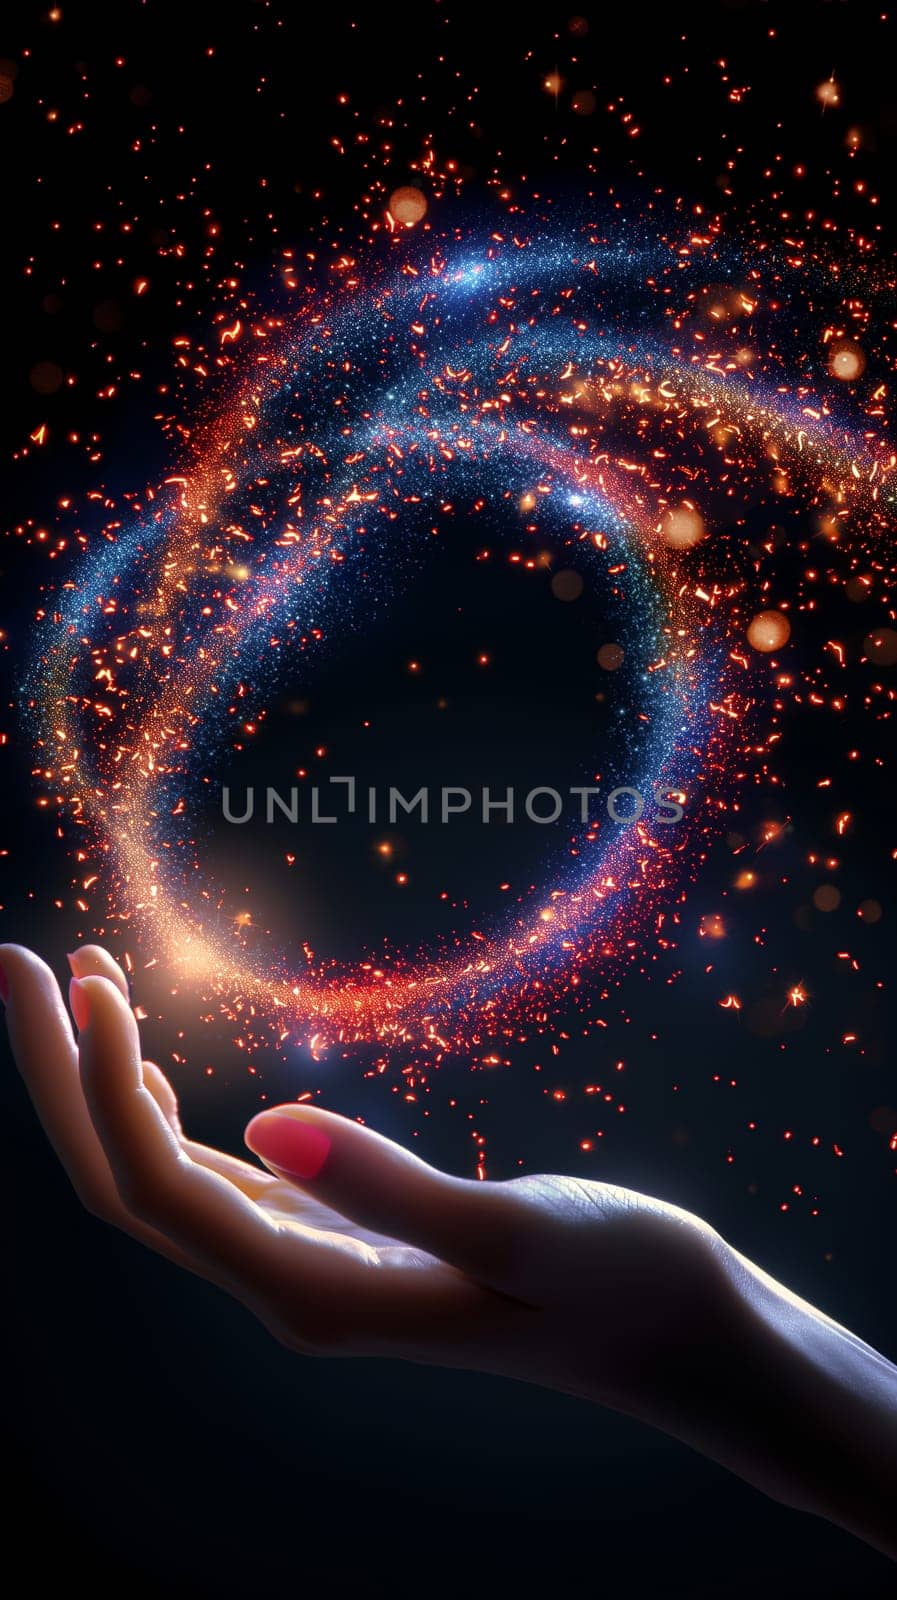 Cosmic Spiral Cradled in a Hand Against Dark Backdrop by chrisroll